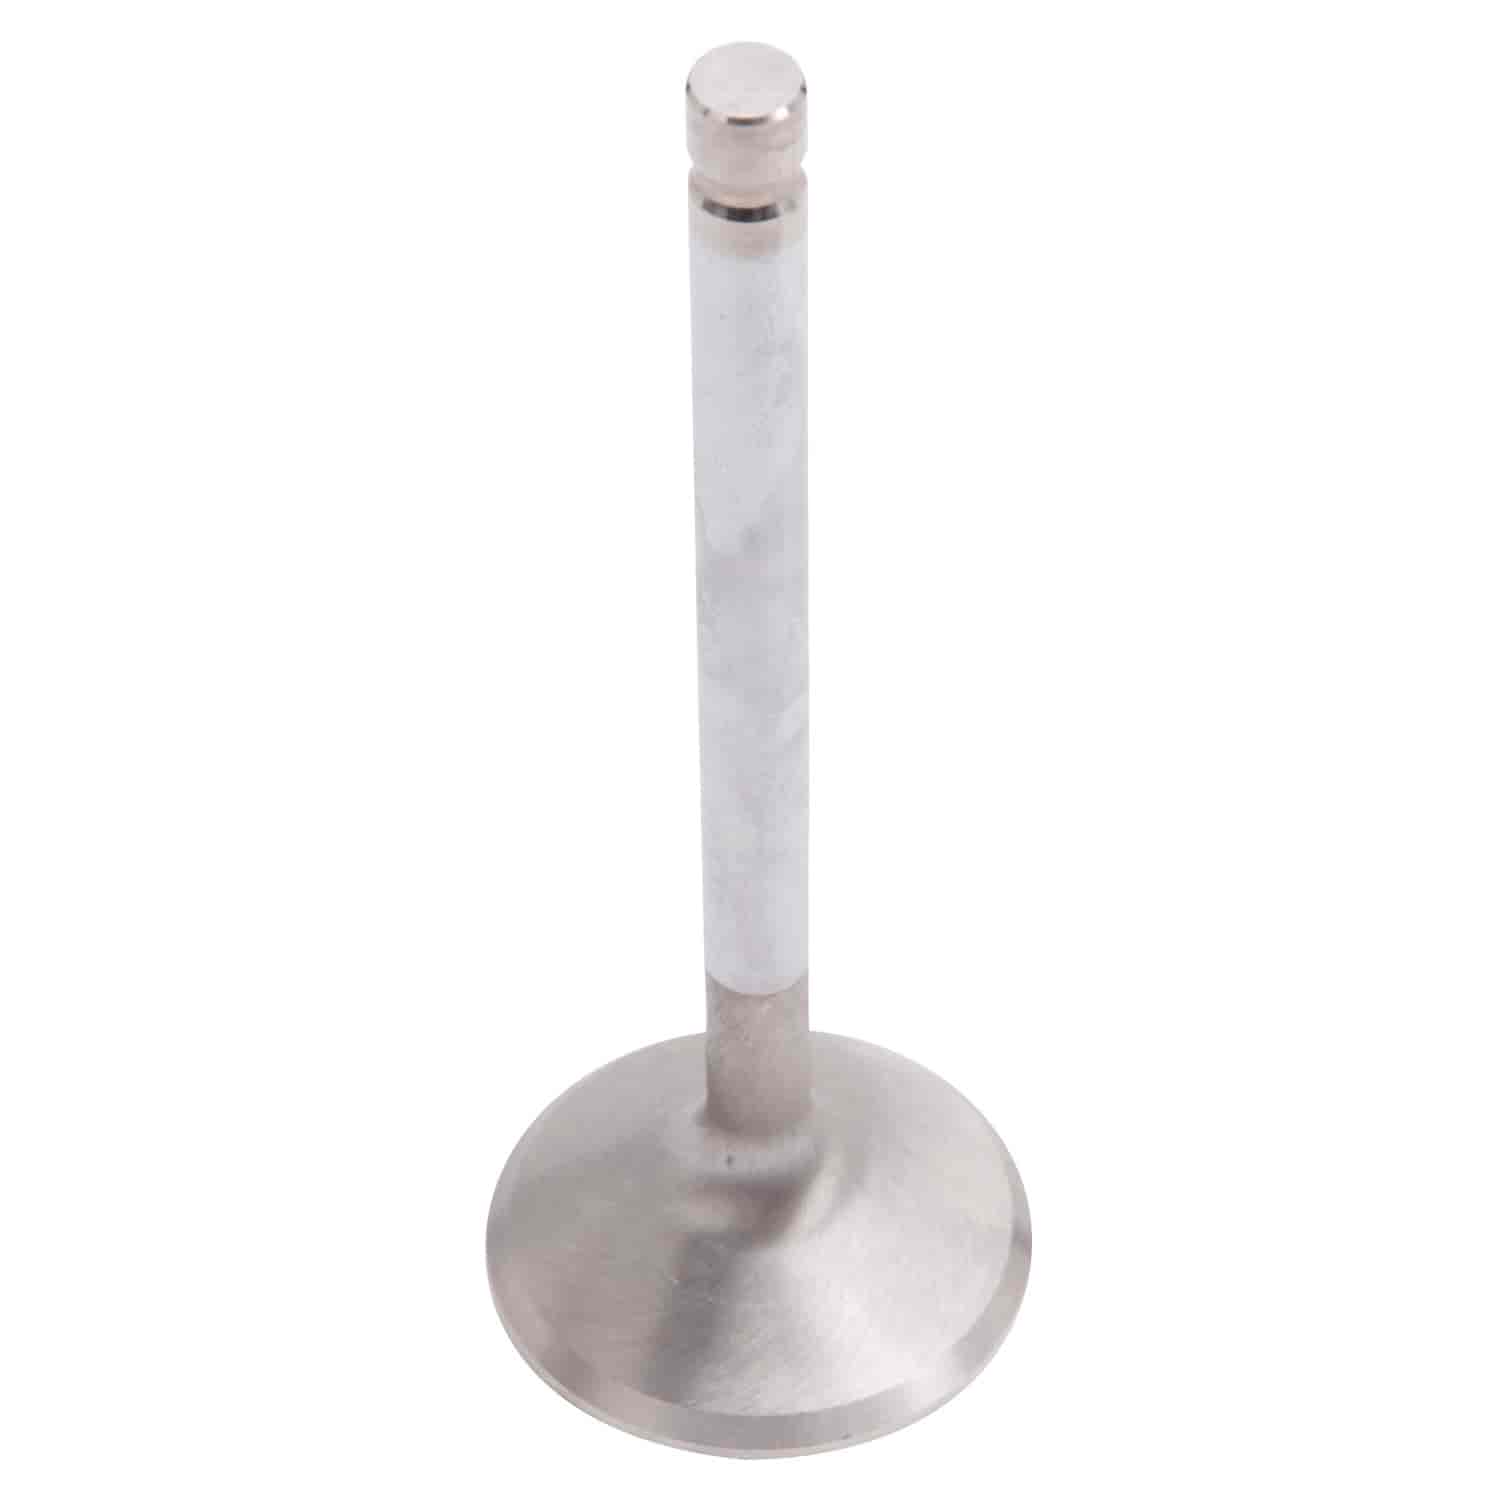 Single Exhaust Valve 1.76" for Big Block Ford Performer RPM Heads #350-60679, 350-60699, 350-61669, & 350-61649